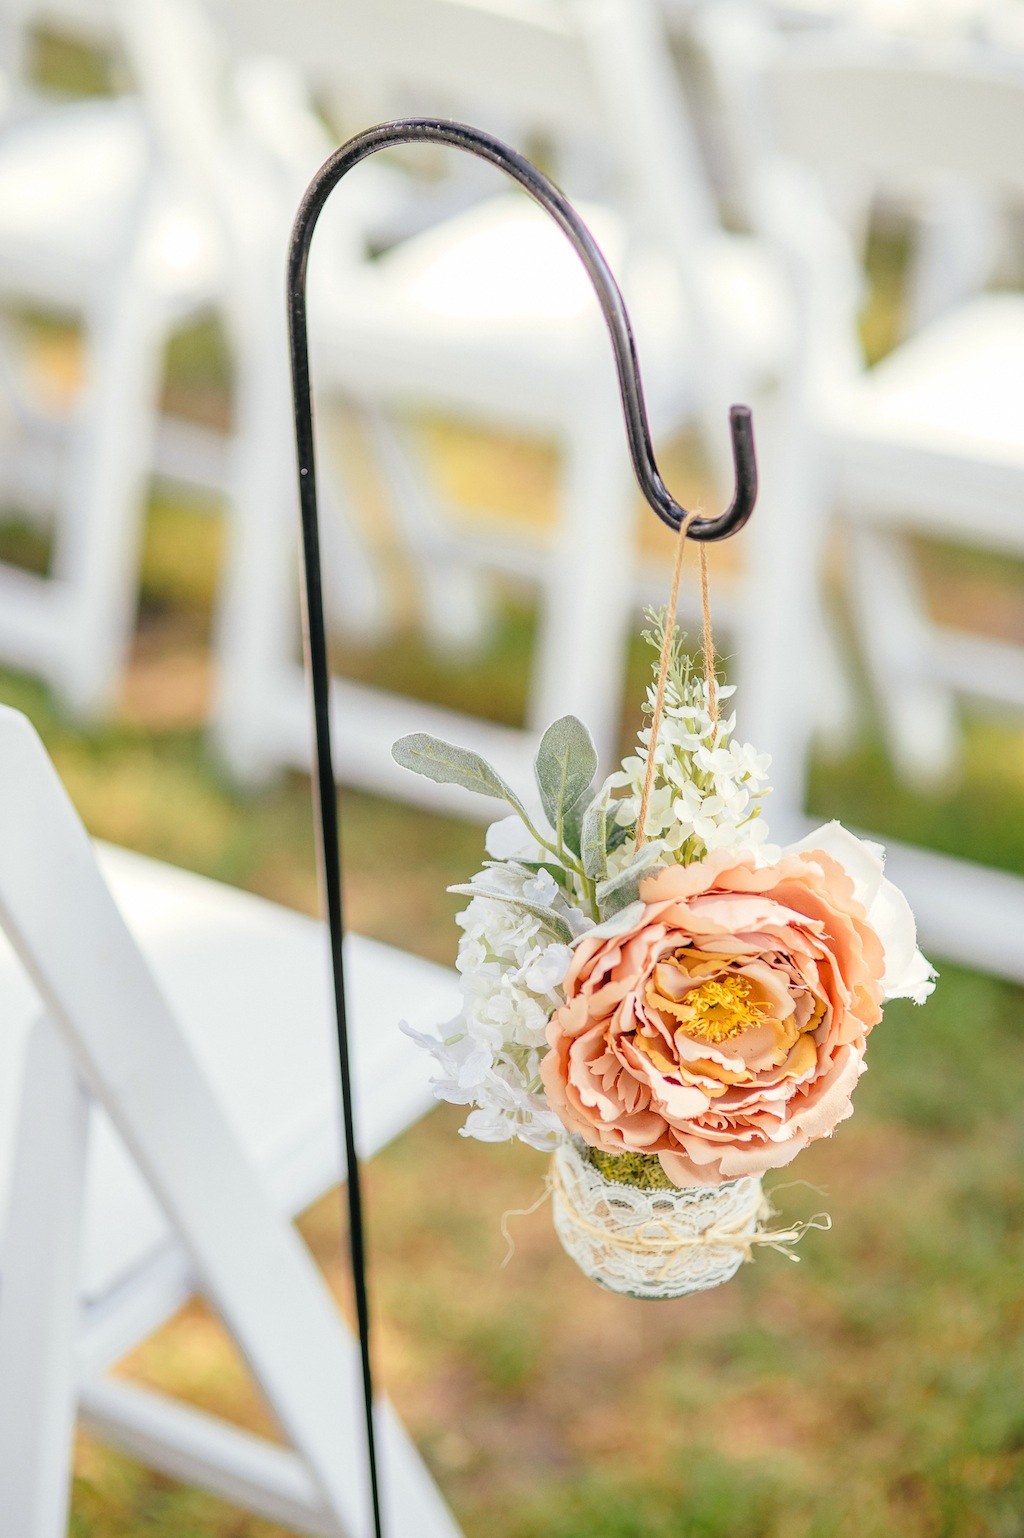 Cross Creek Ranch Wedding near Tampa Bay, Fl - Rustic Rose, Burlap and Lace by Lakeland Wedding Photographer Sunglow Photography (9)